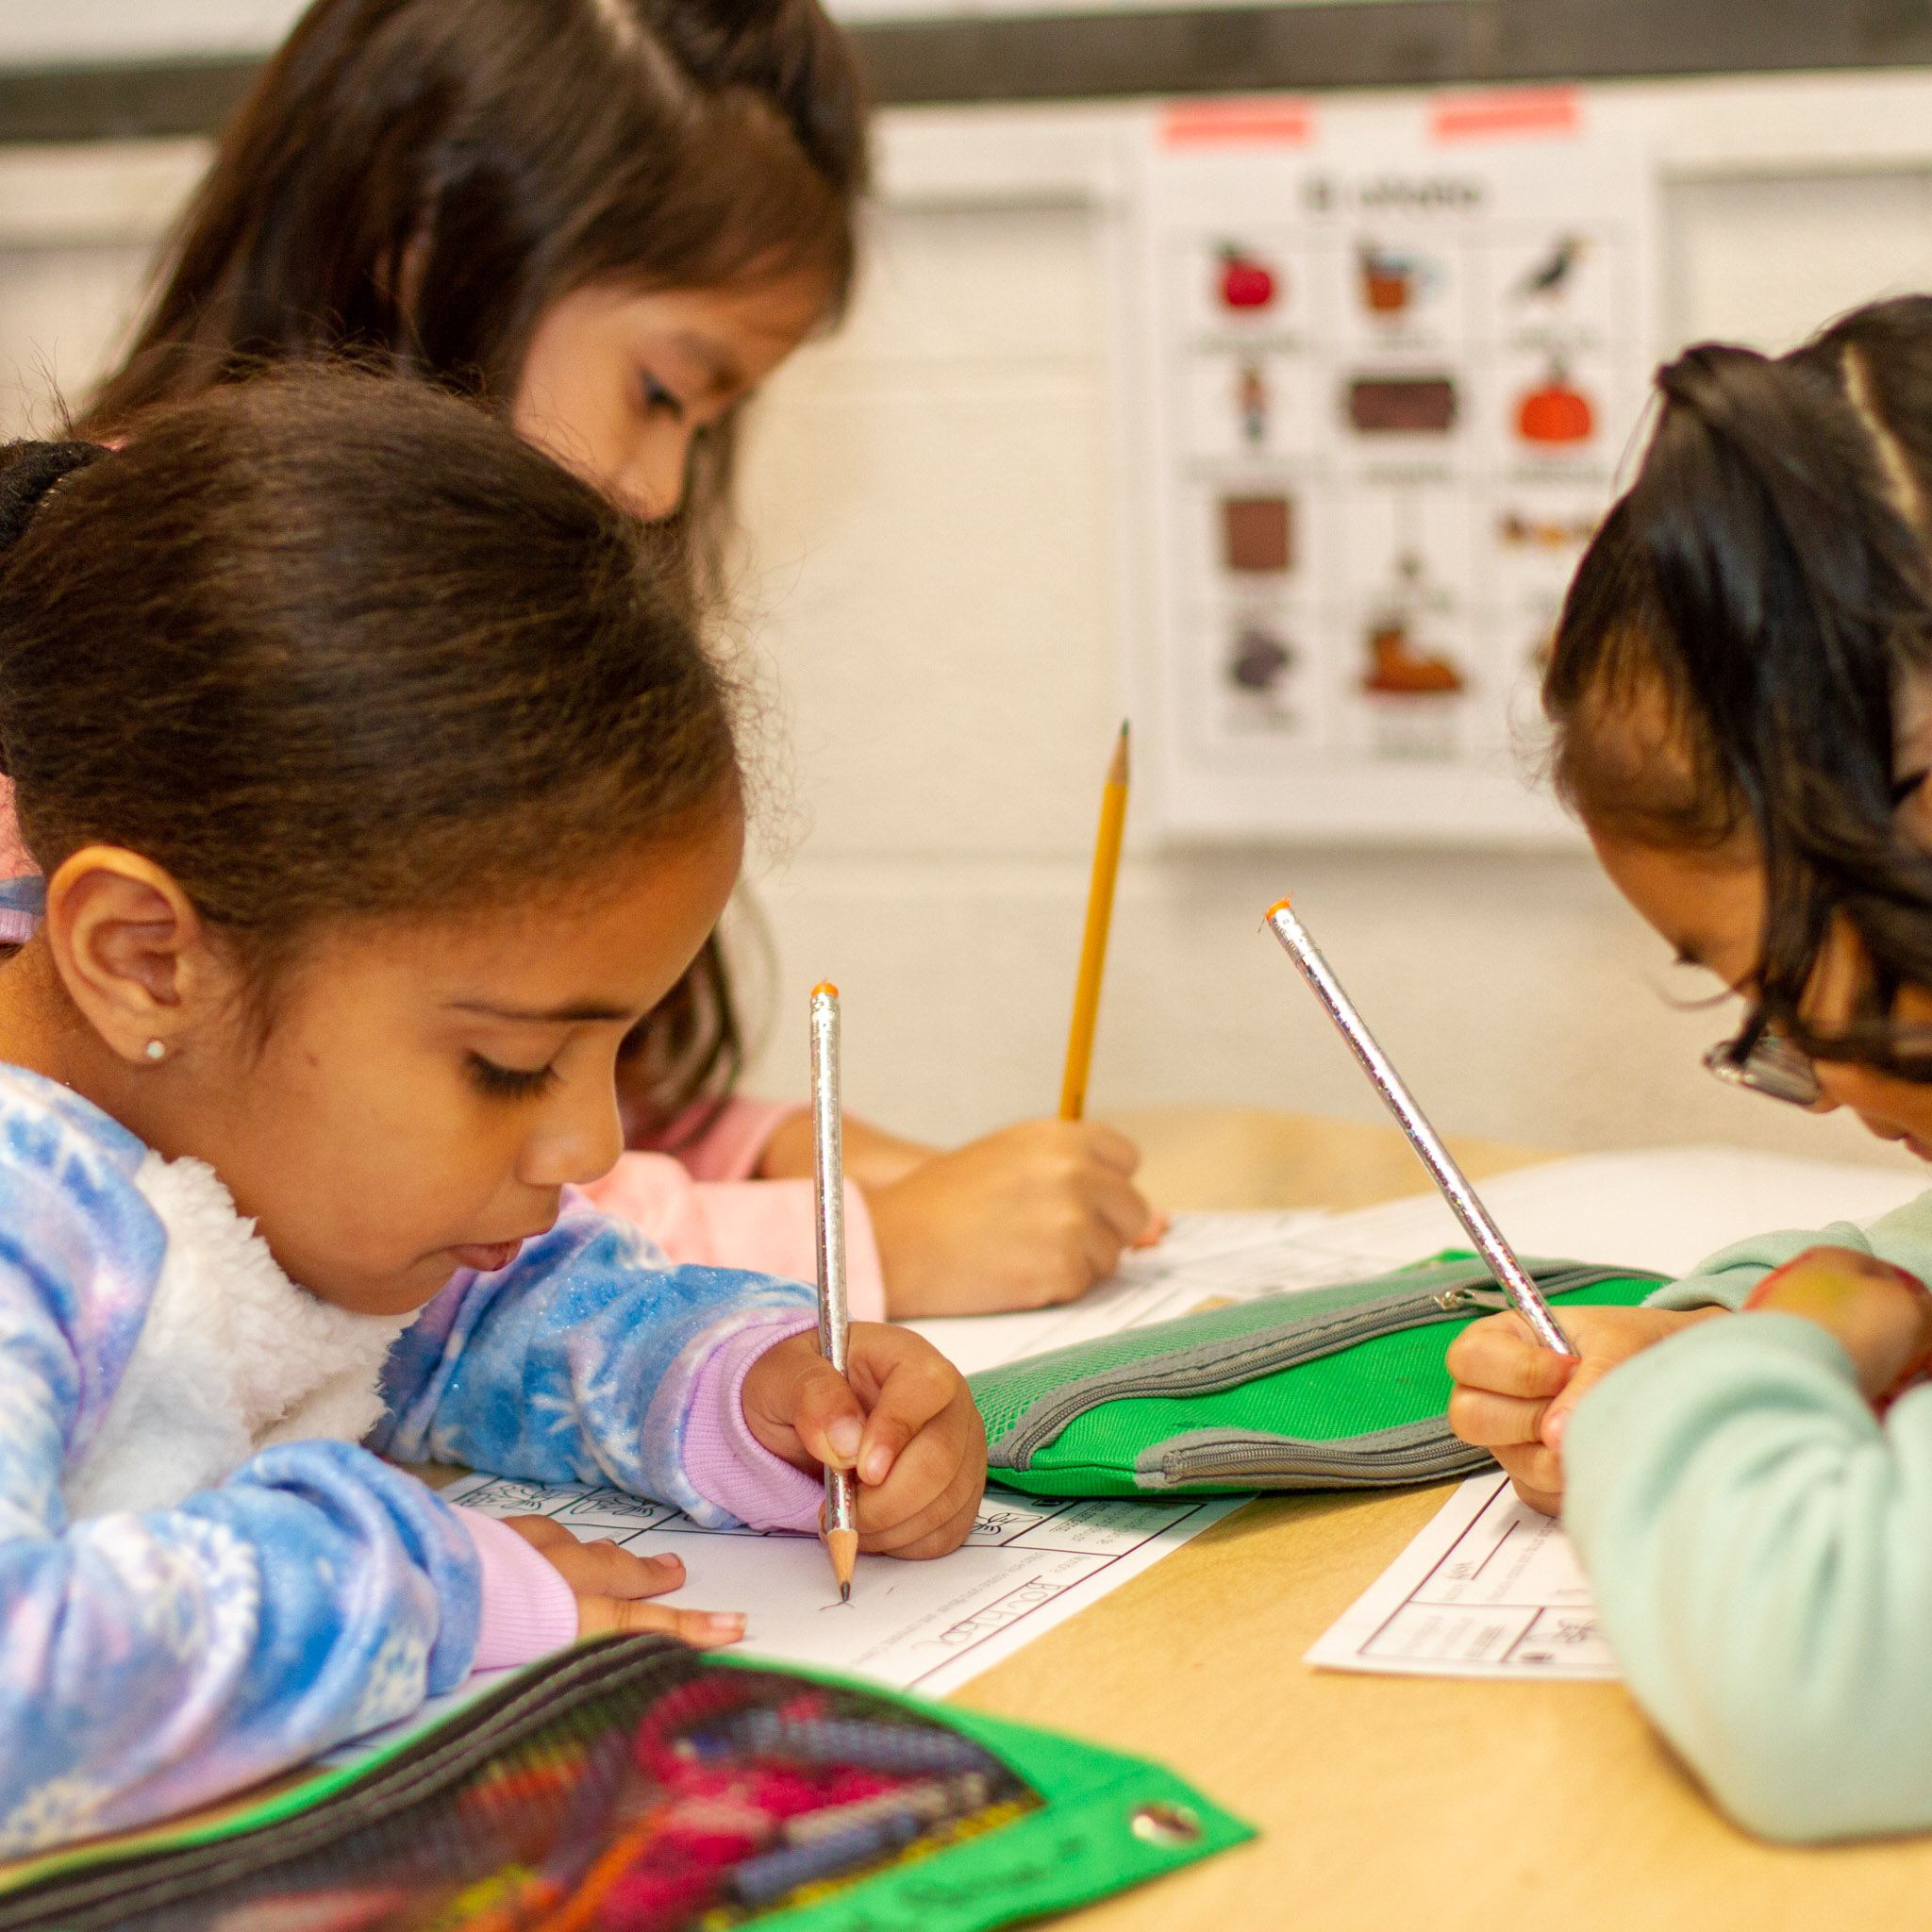 Three Kindergarten girls looking down at their paper assignment while they hold a pencil at a small group table.  There is a green pencil pouch on the table with them.